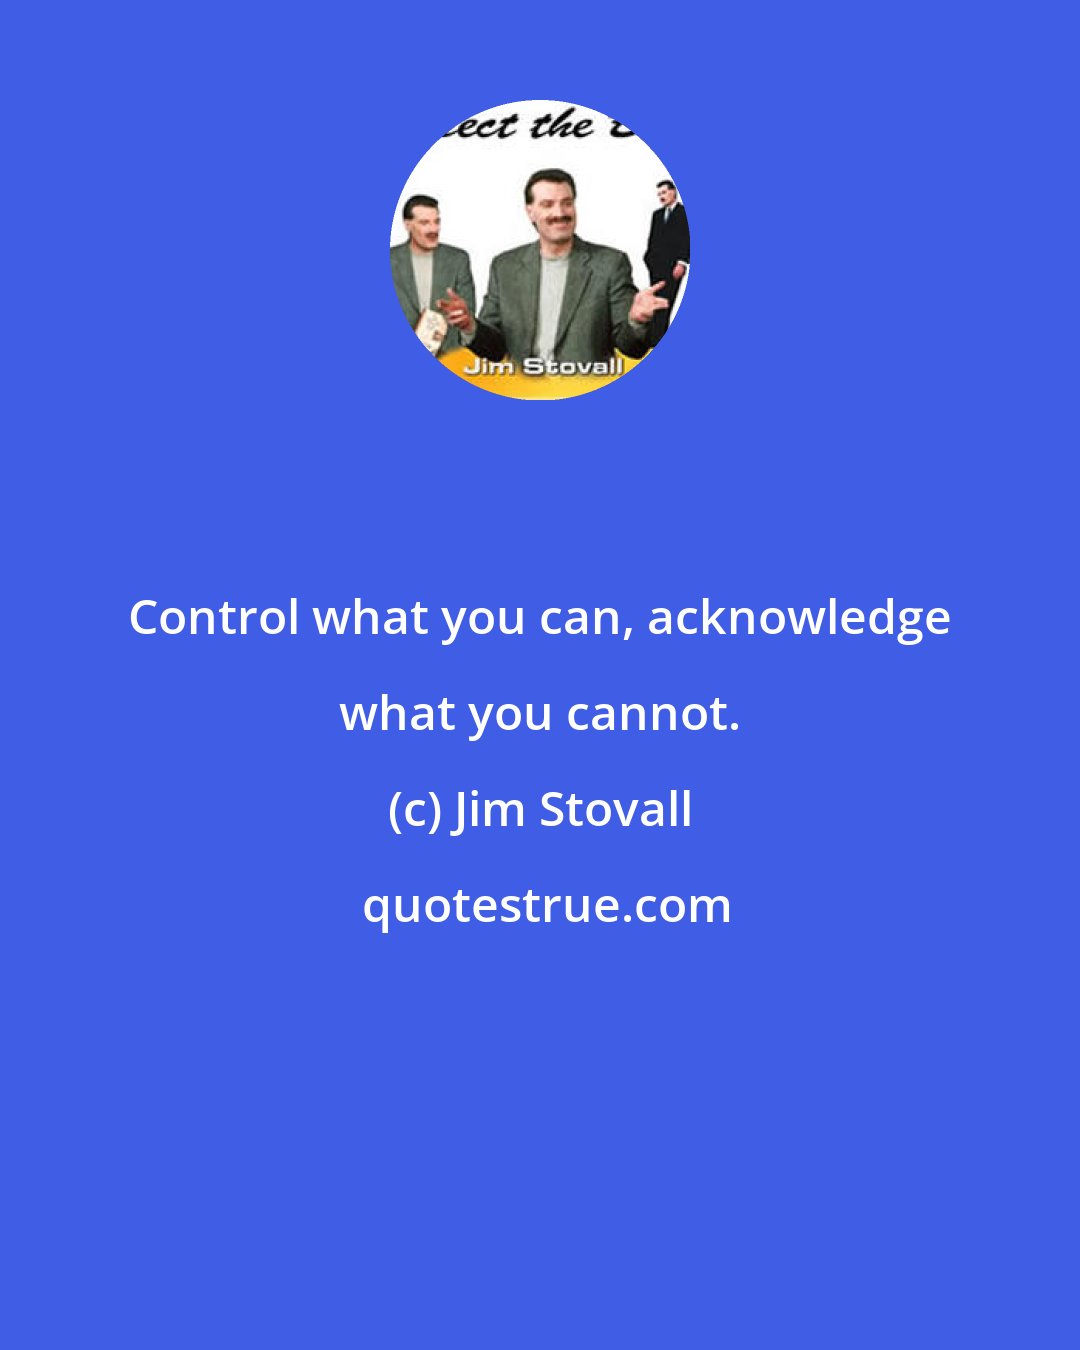 Jim Stovall: Control what you can, acknowledge what you cannot.